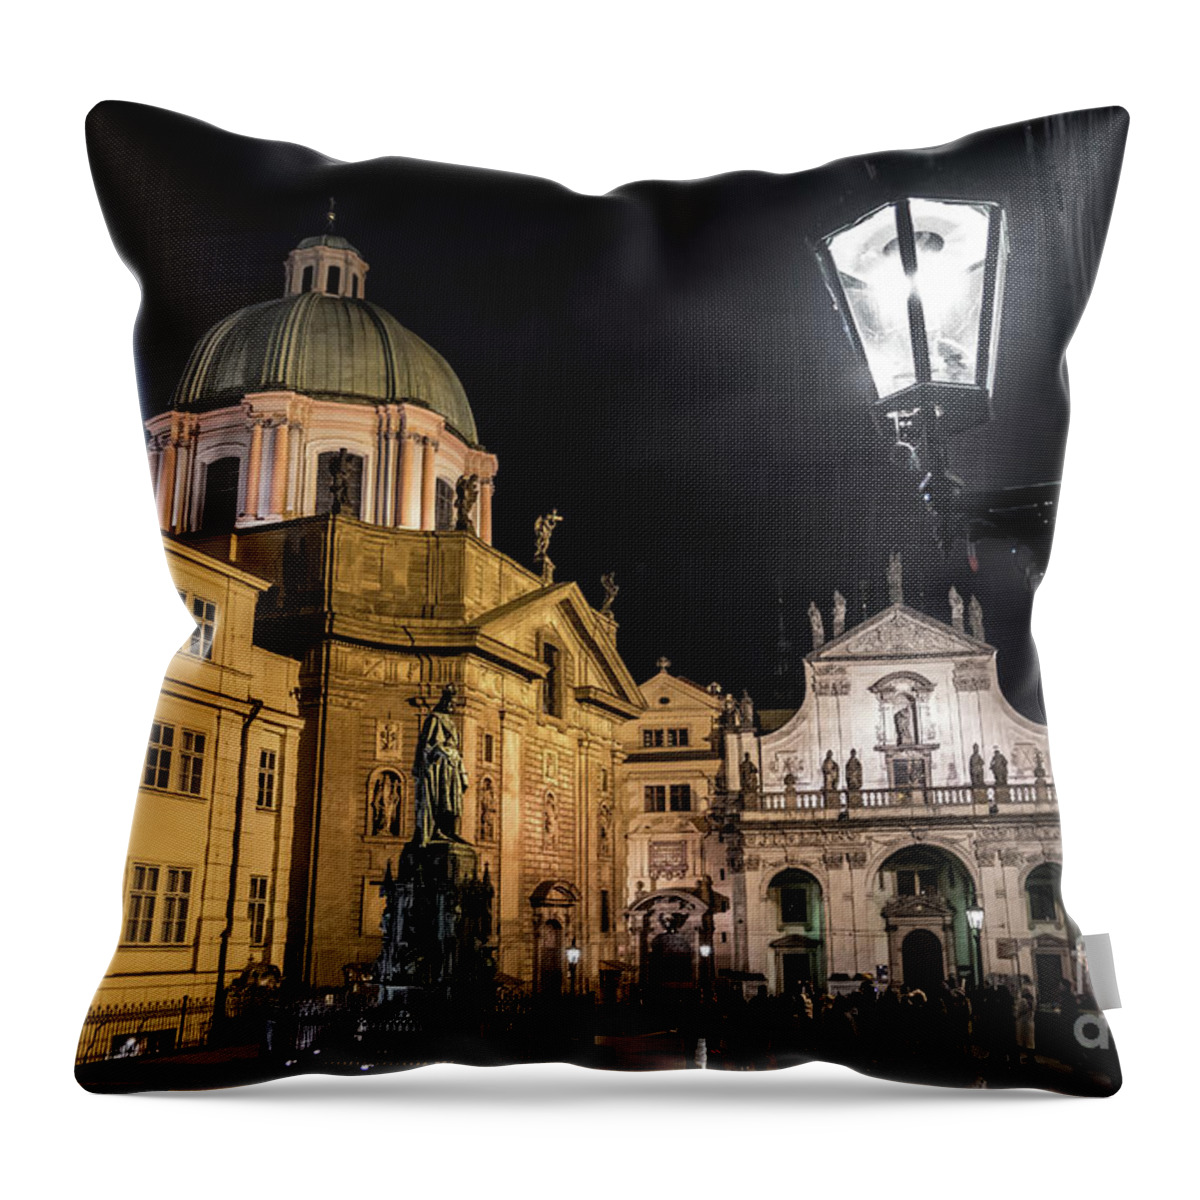 Prague Throw Pillow featuring the photograph Historic Buildings Beneath The Tower Of Charles Bridge In The Night In Prague In The Czech Republic #1 by Andreas Berthold